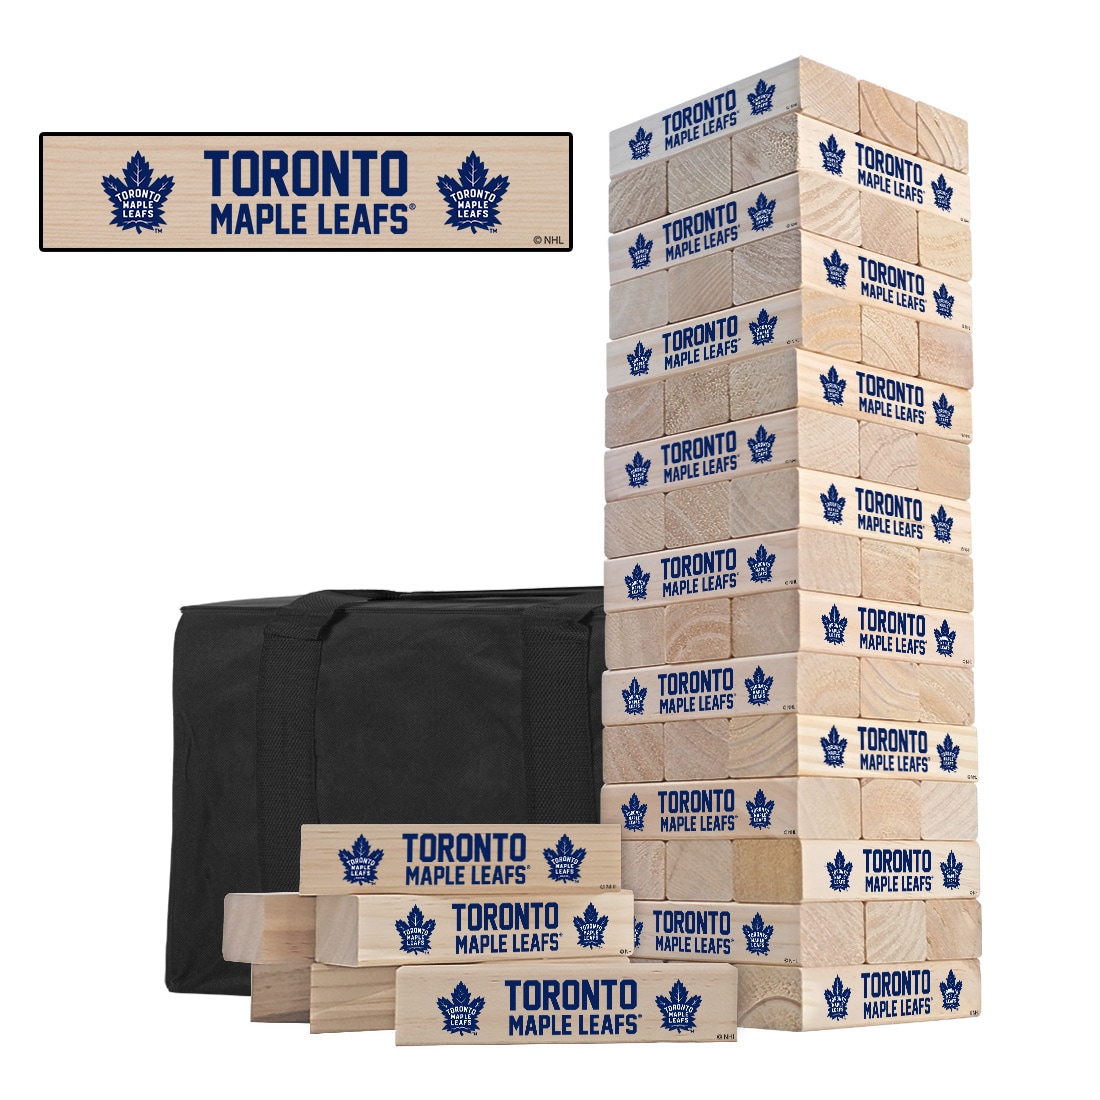 Toronto Maple Leafs St. Pats Game pop-up at stackt market